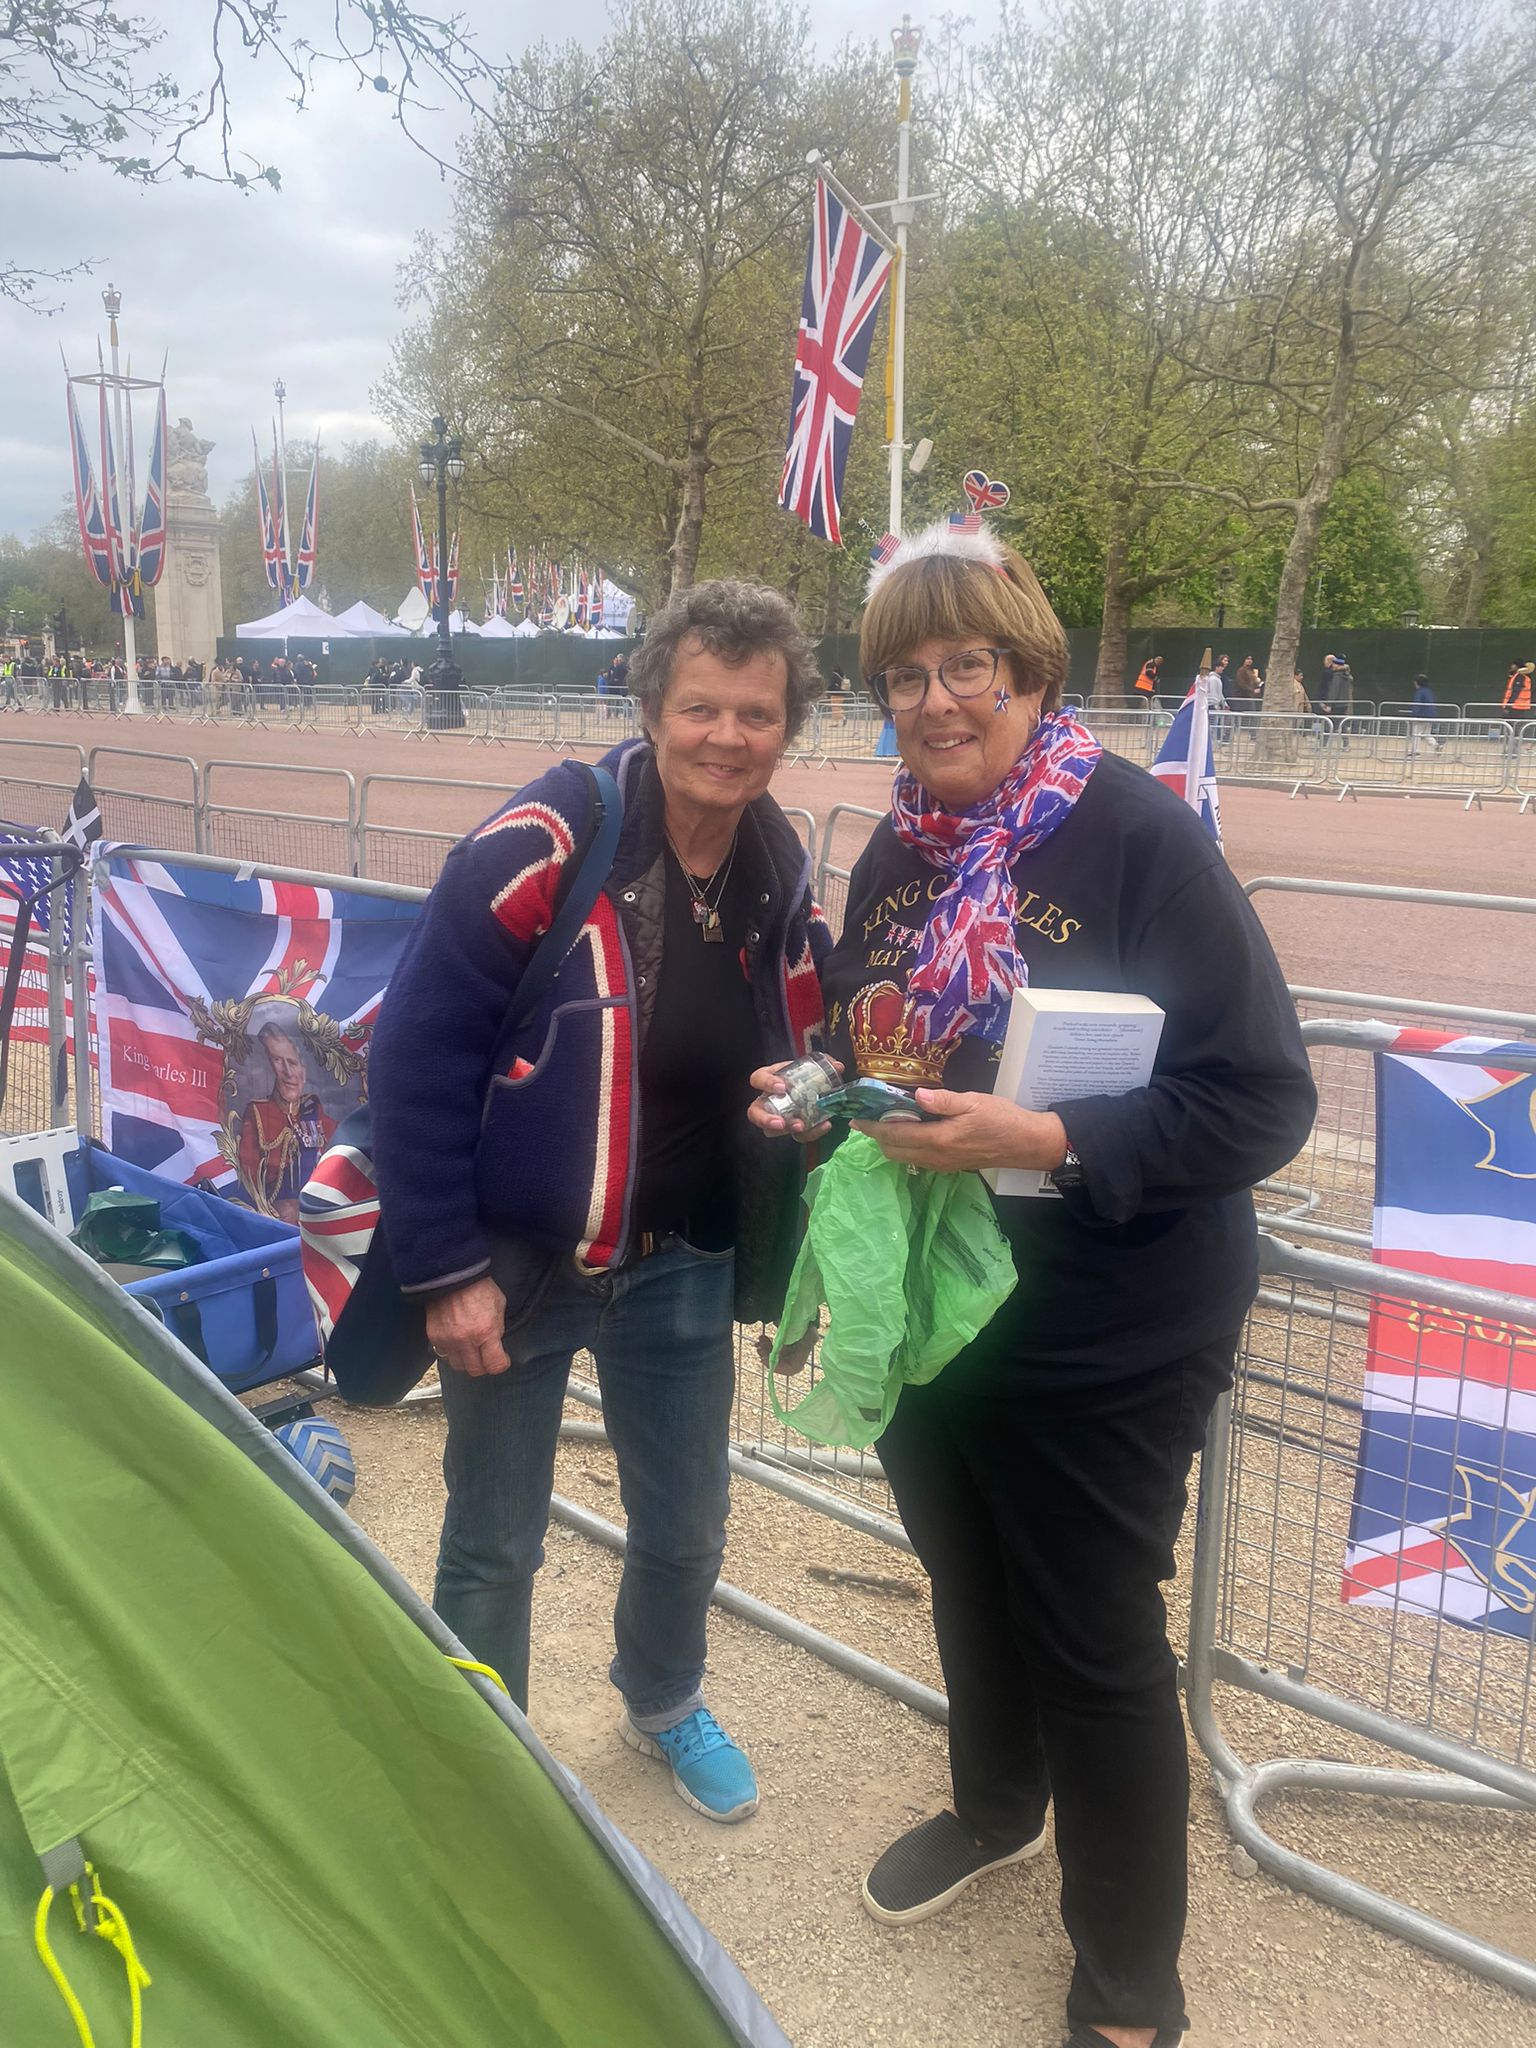 Donna Werner (right) arrived from the US last week and was surprised by a friend she made during the William and Kate’s royal wedding